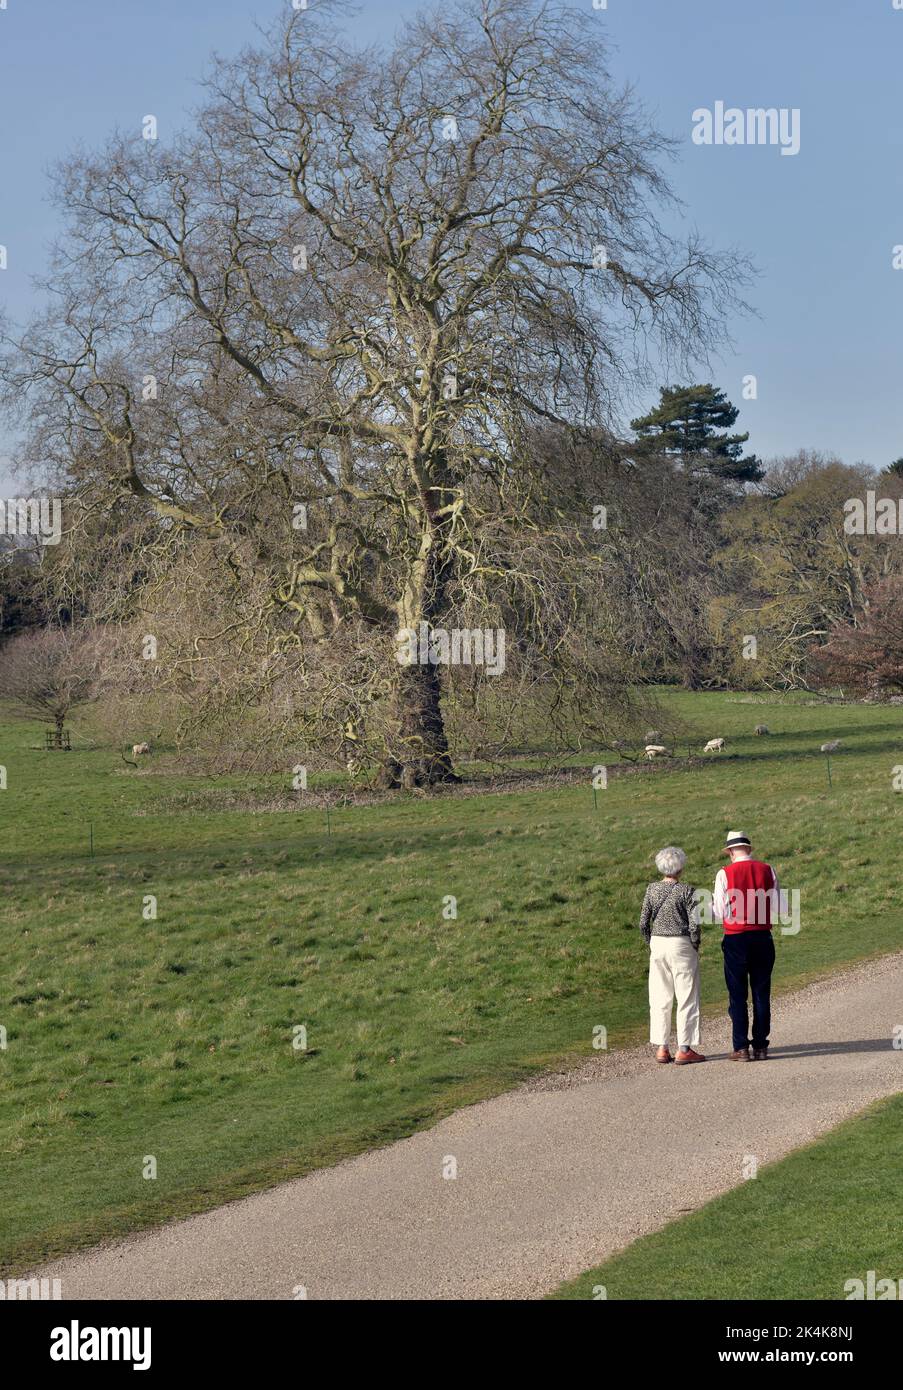 older couple walking together in country park suffolk england Stock Photo